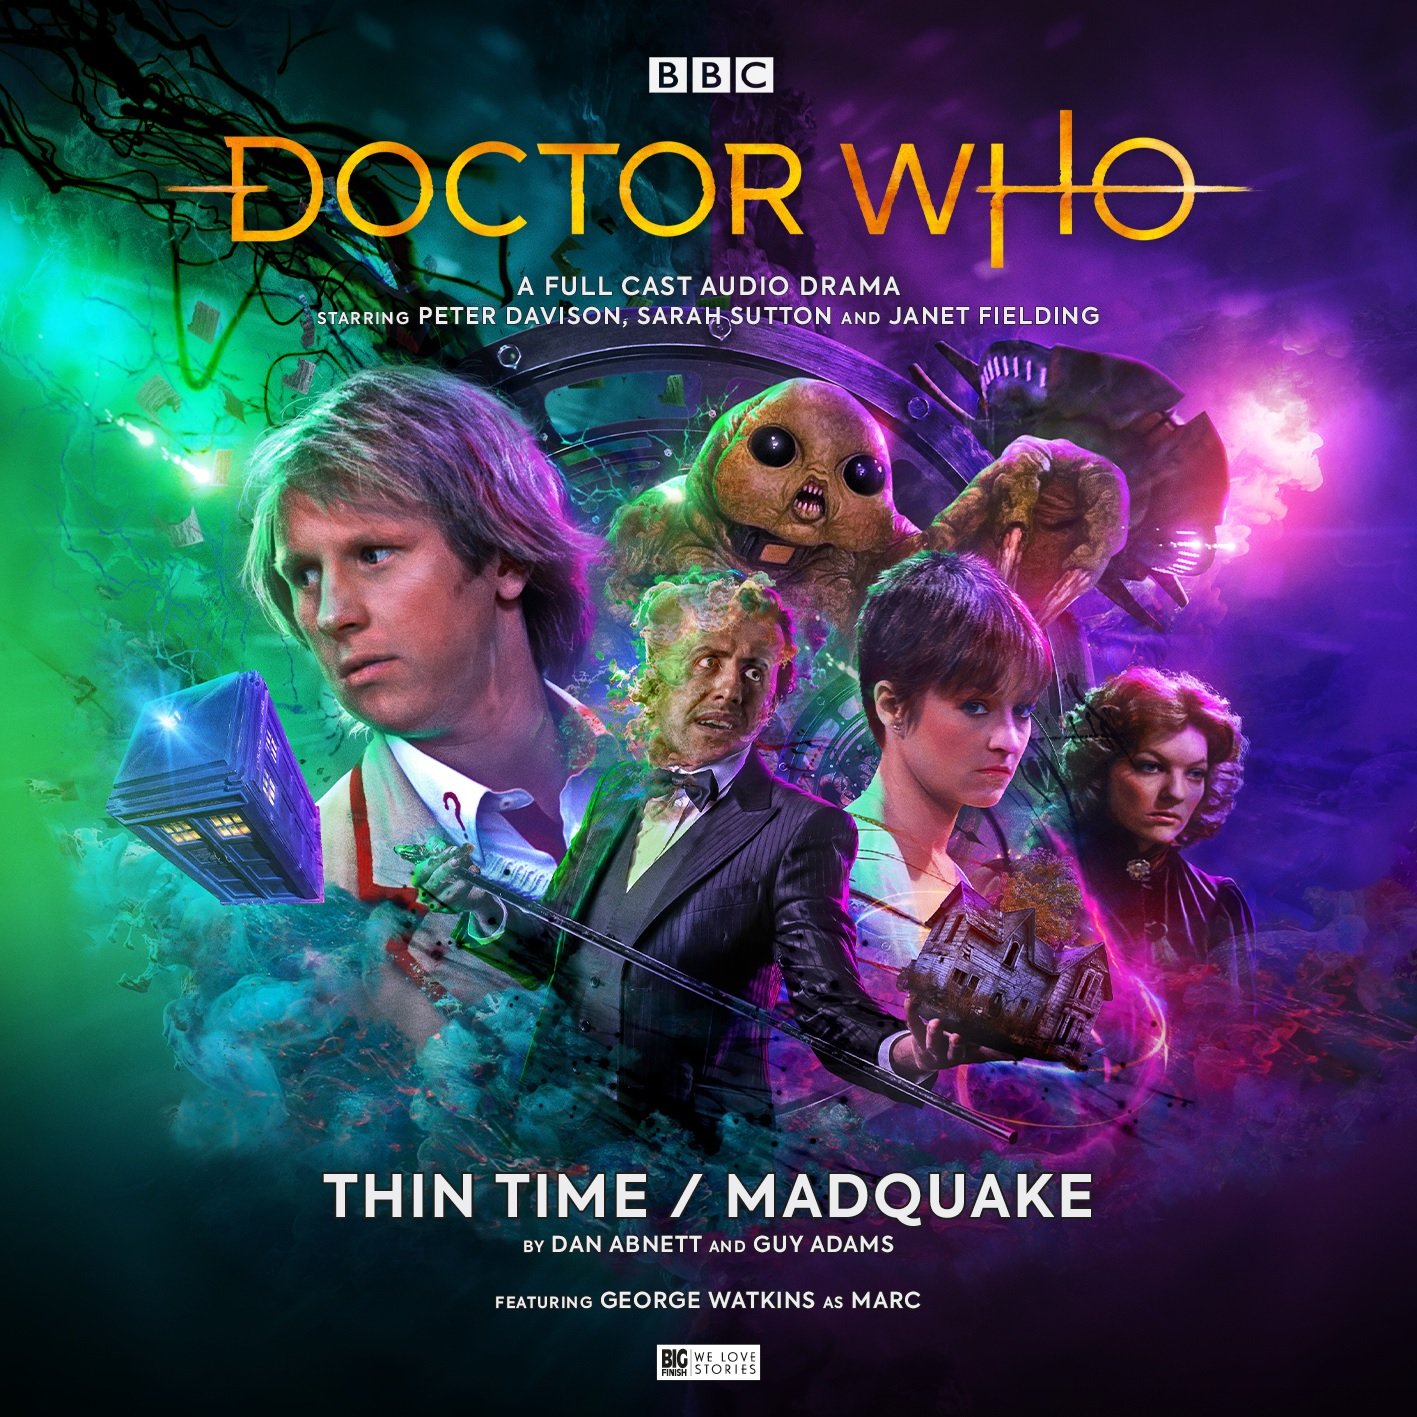 Tegan and Nyssa to Face the Slitheen in Big Finish’s Thin Time/ Madquake